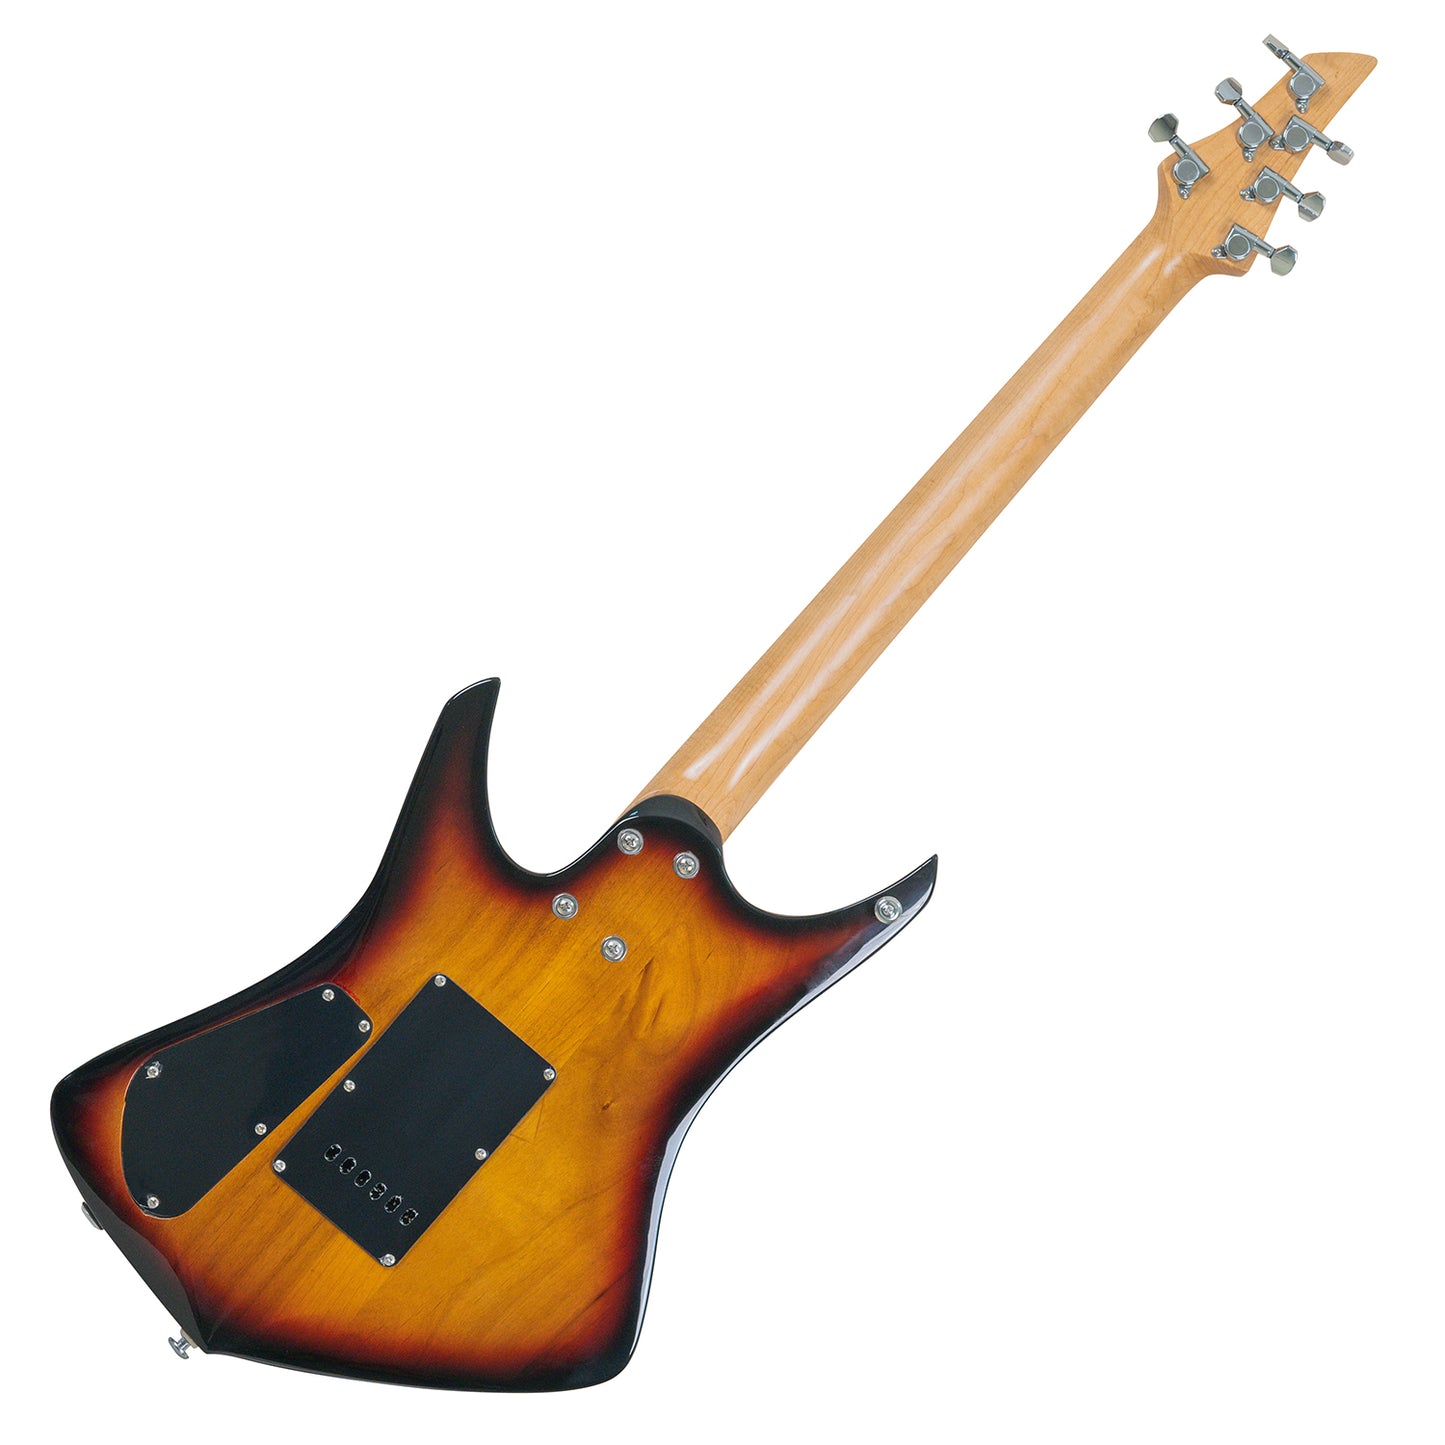 Latitude Phoenix Electric Guitar,6 String Solid Body Electric Guitars,Alder Body Killer Key,Stainless Steel Frets Guitar,Double Truss Rod With Carbon Fiber Rods,Sunset.